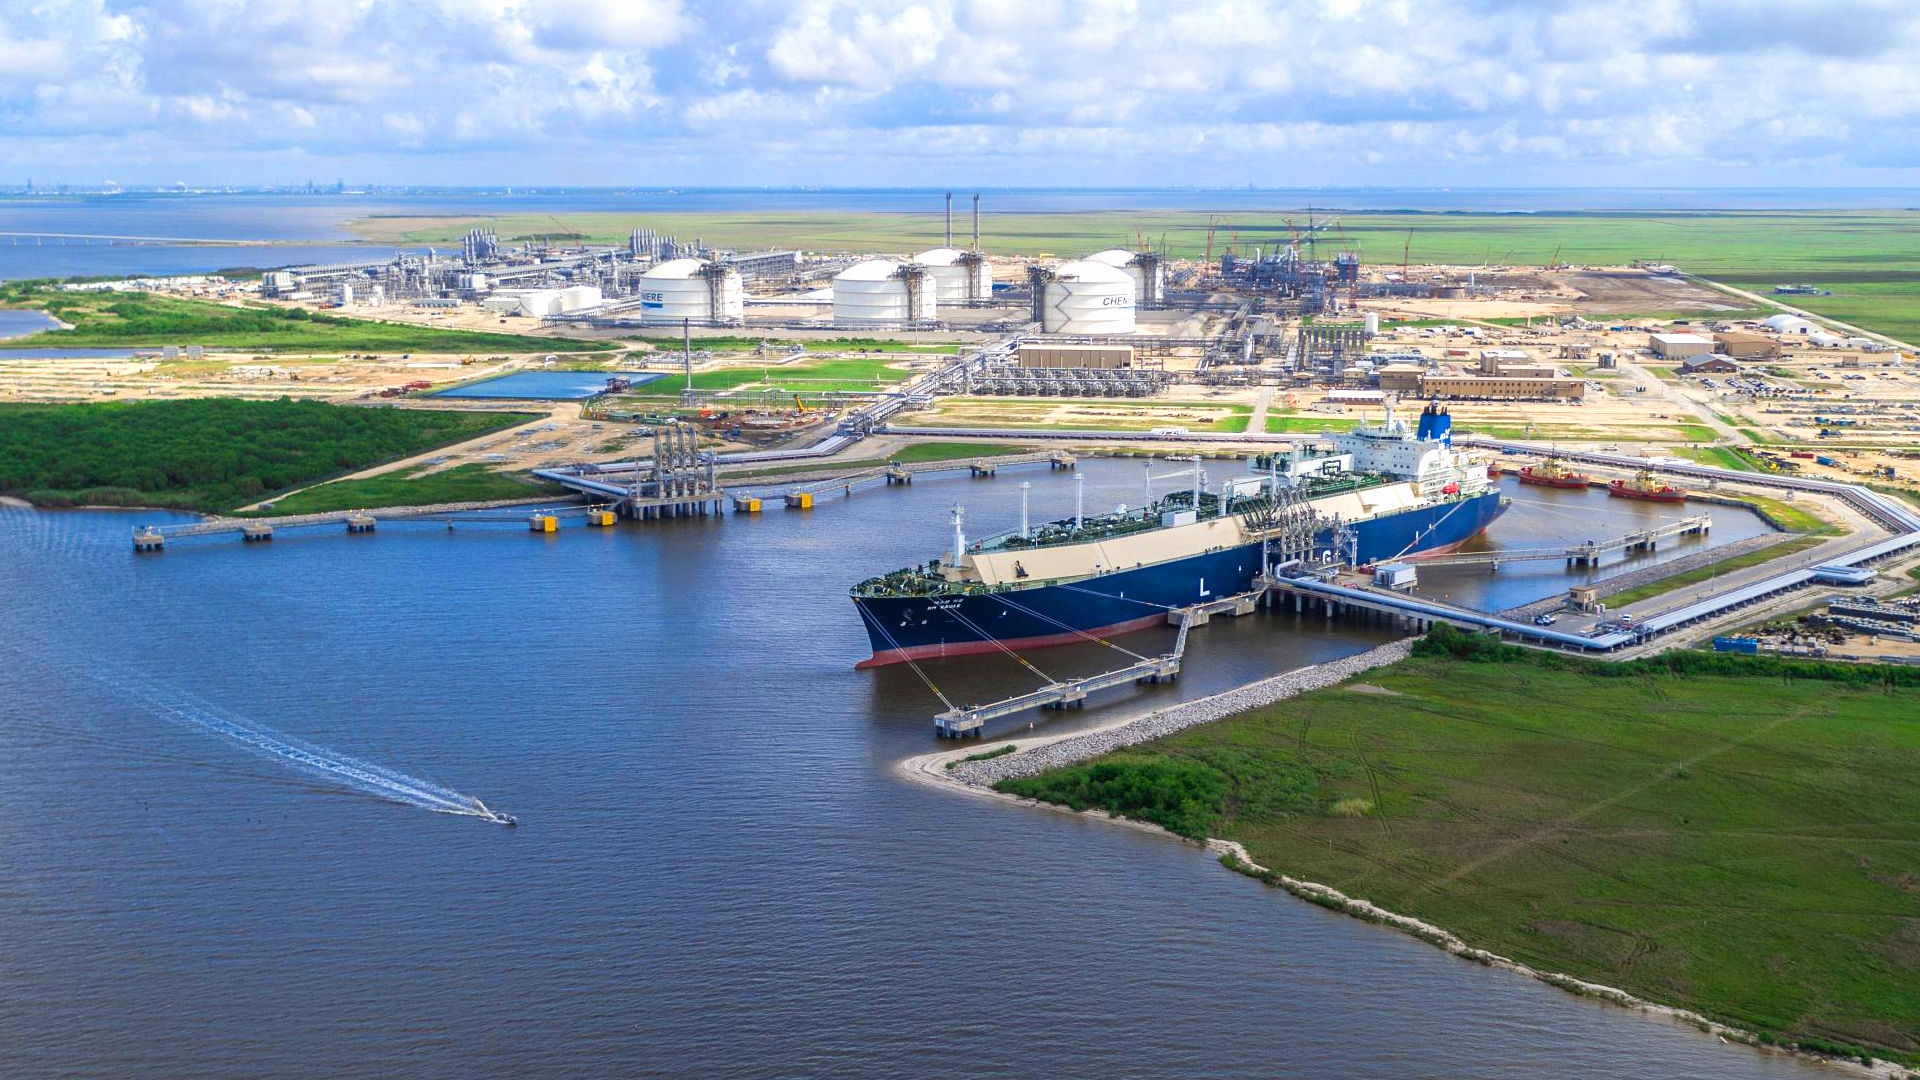 Cheniere to issue GHG emissions data to its LNG customers